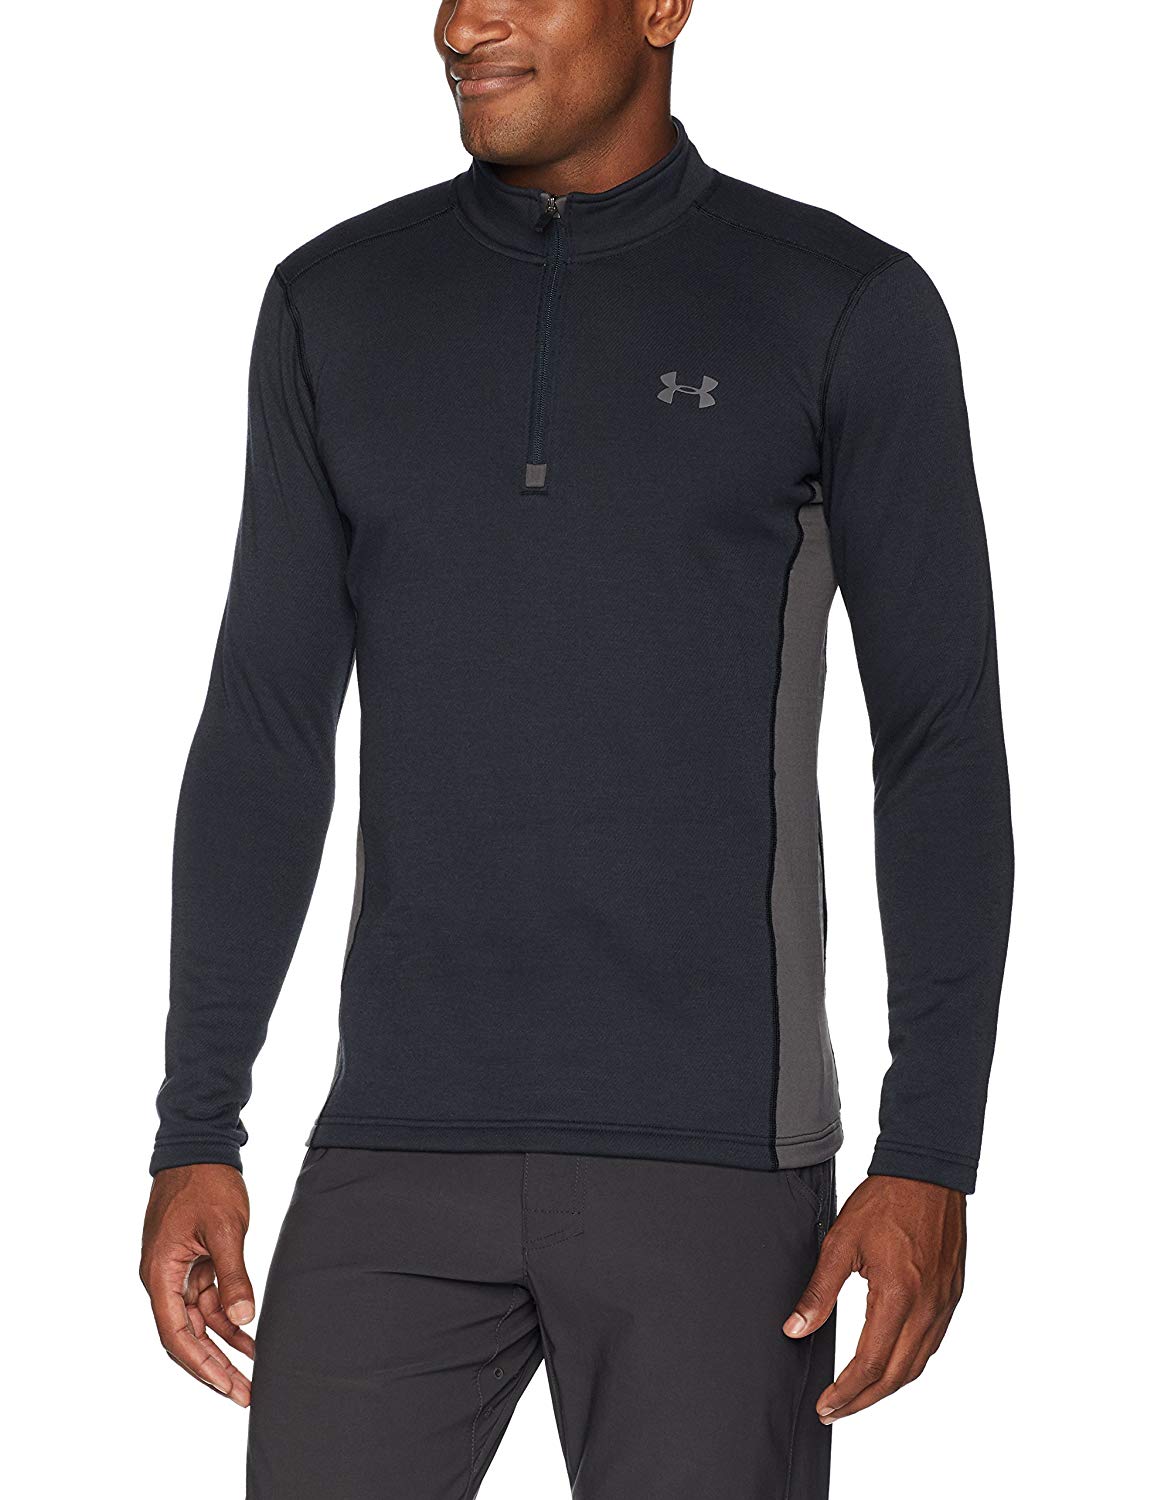 Mens Under Armour Extreme Twill Base Golf Tops